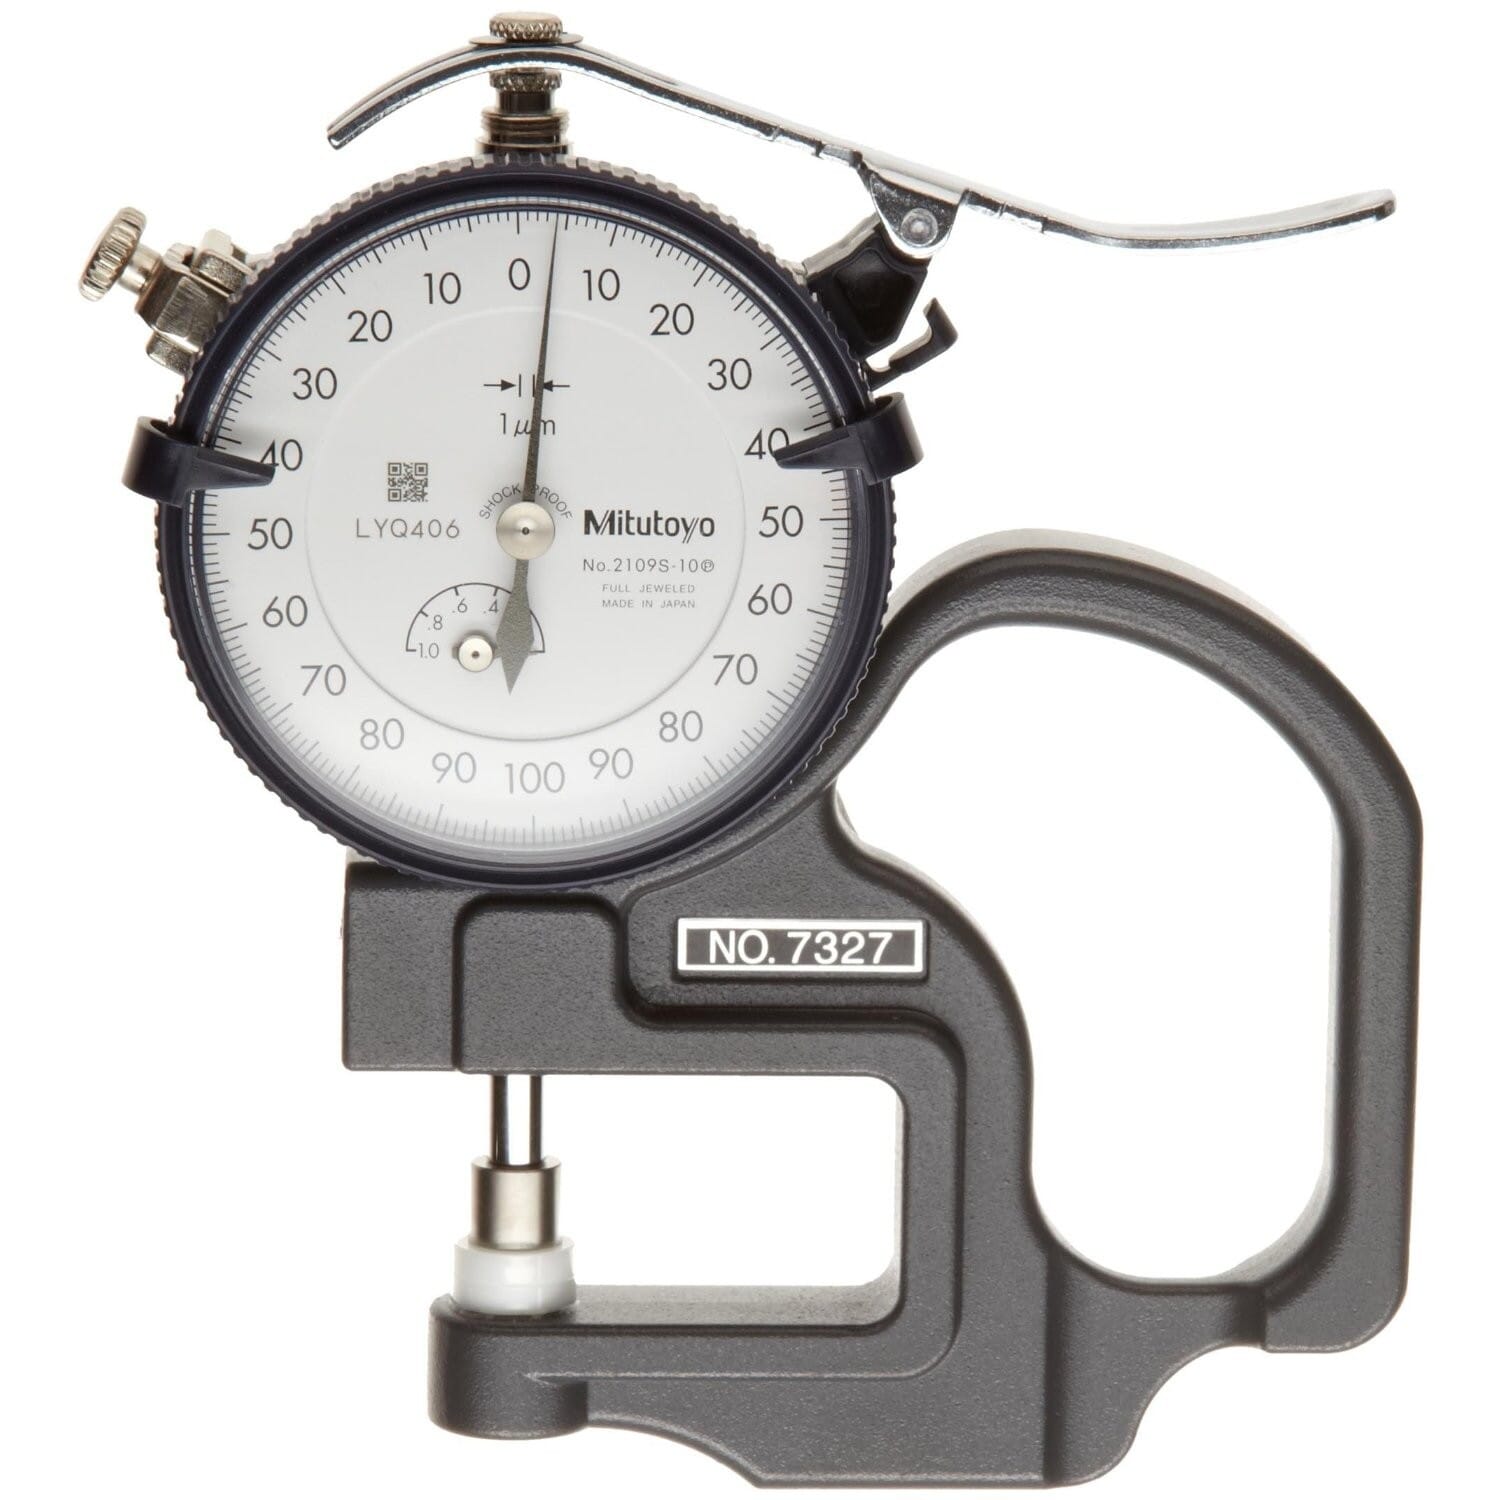 Mitutoyo Dial Thickness Gauge 1Mm X 0.001Mm